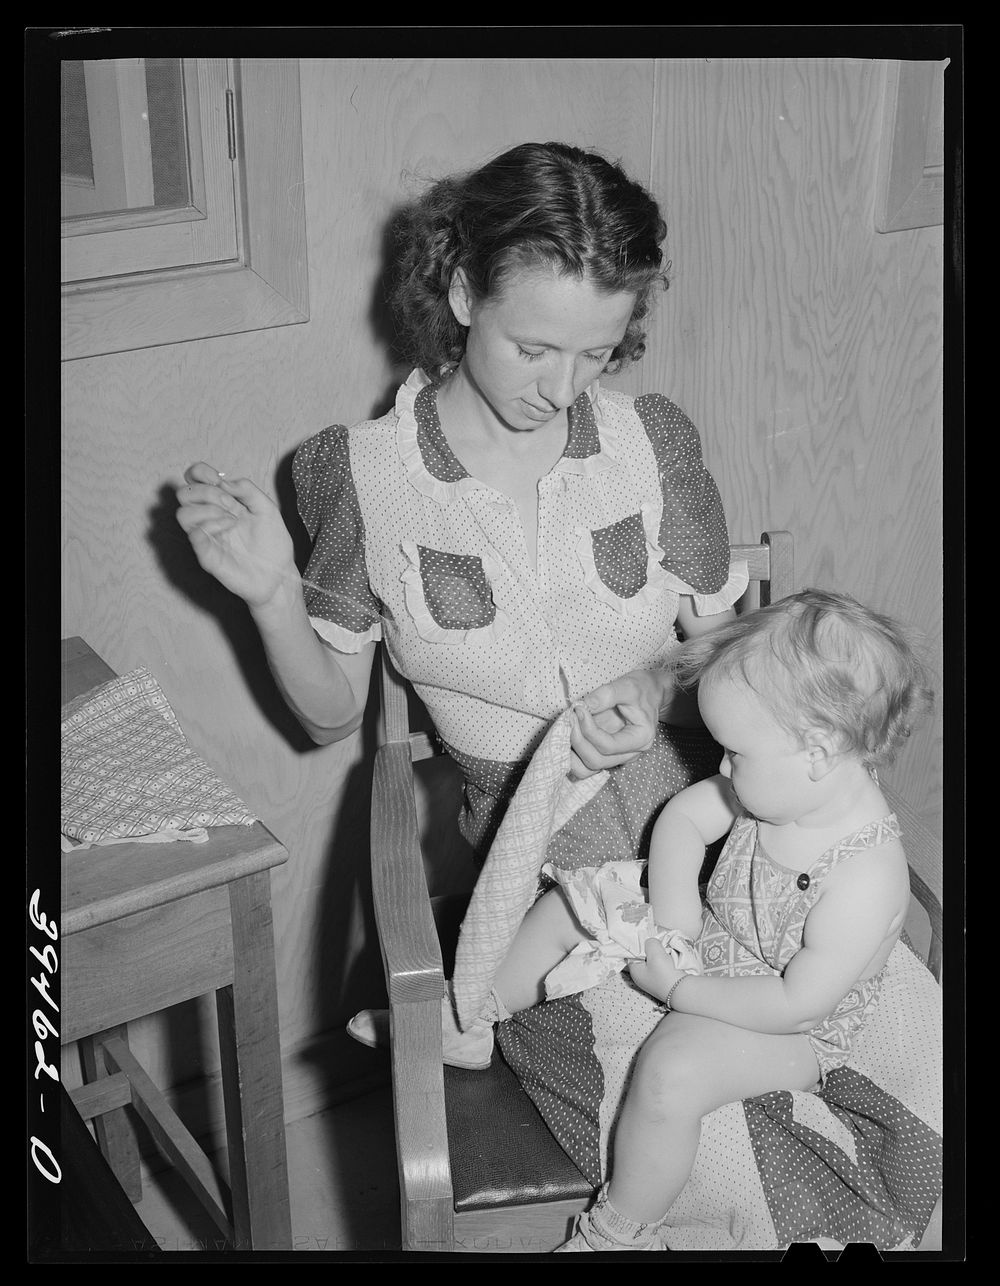 Mother and child. FSA (Farm Security Administration) farm labor camp. Caldwell, Idaho by Russell Lee